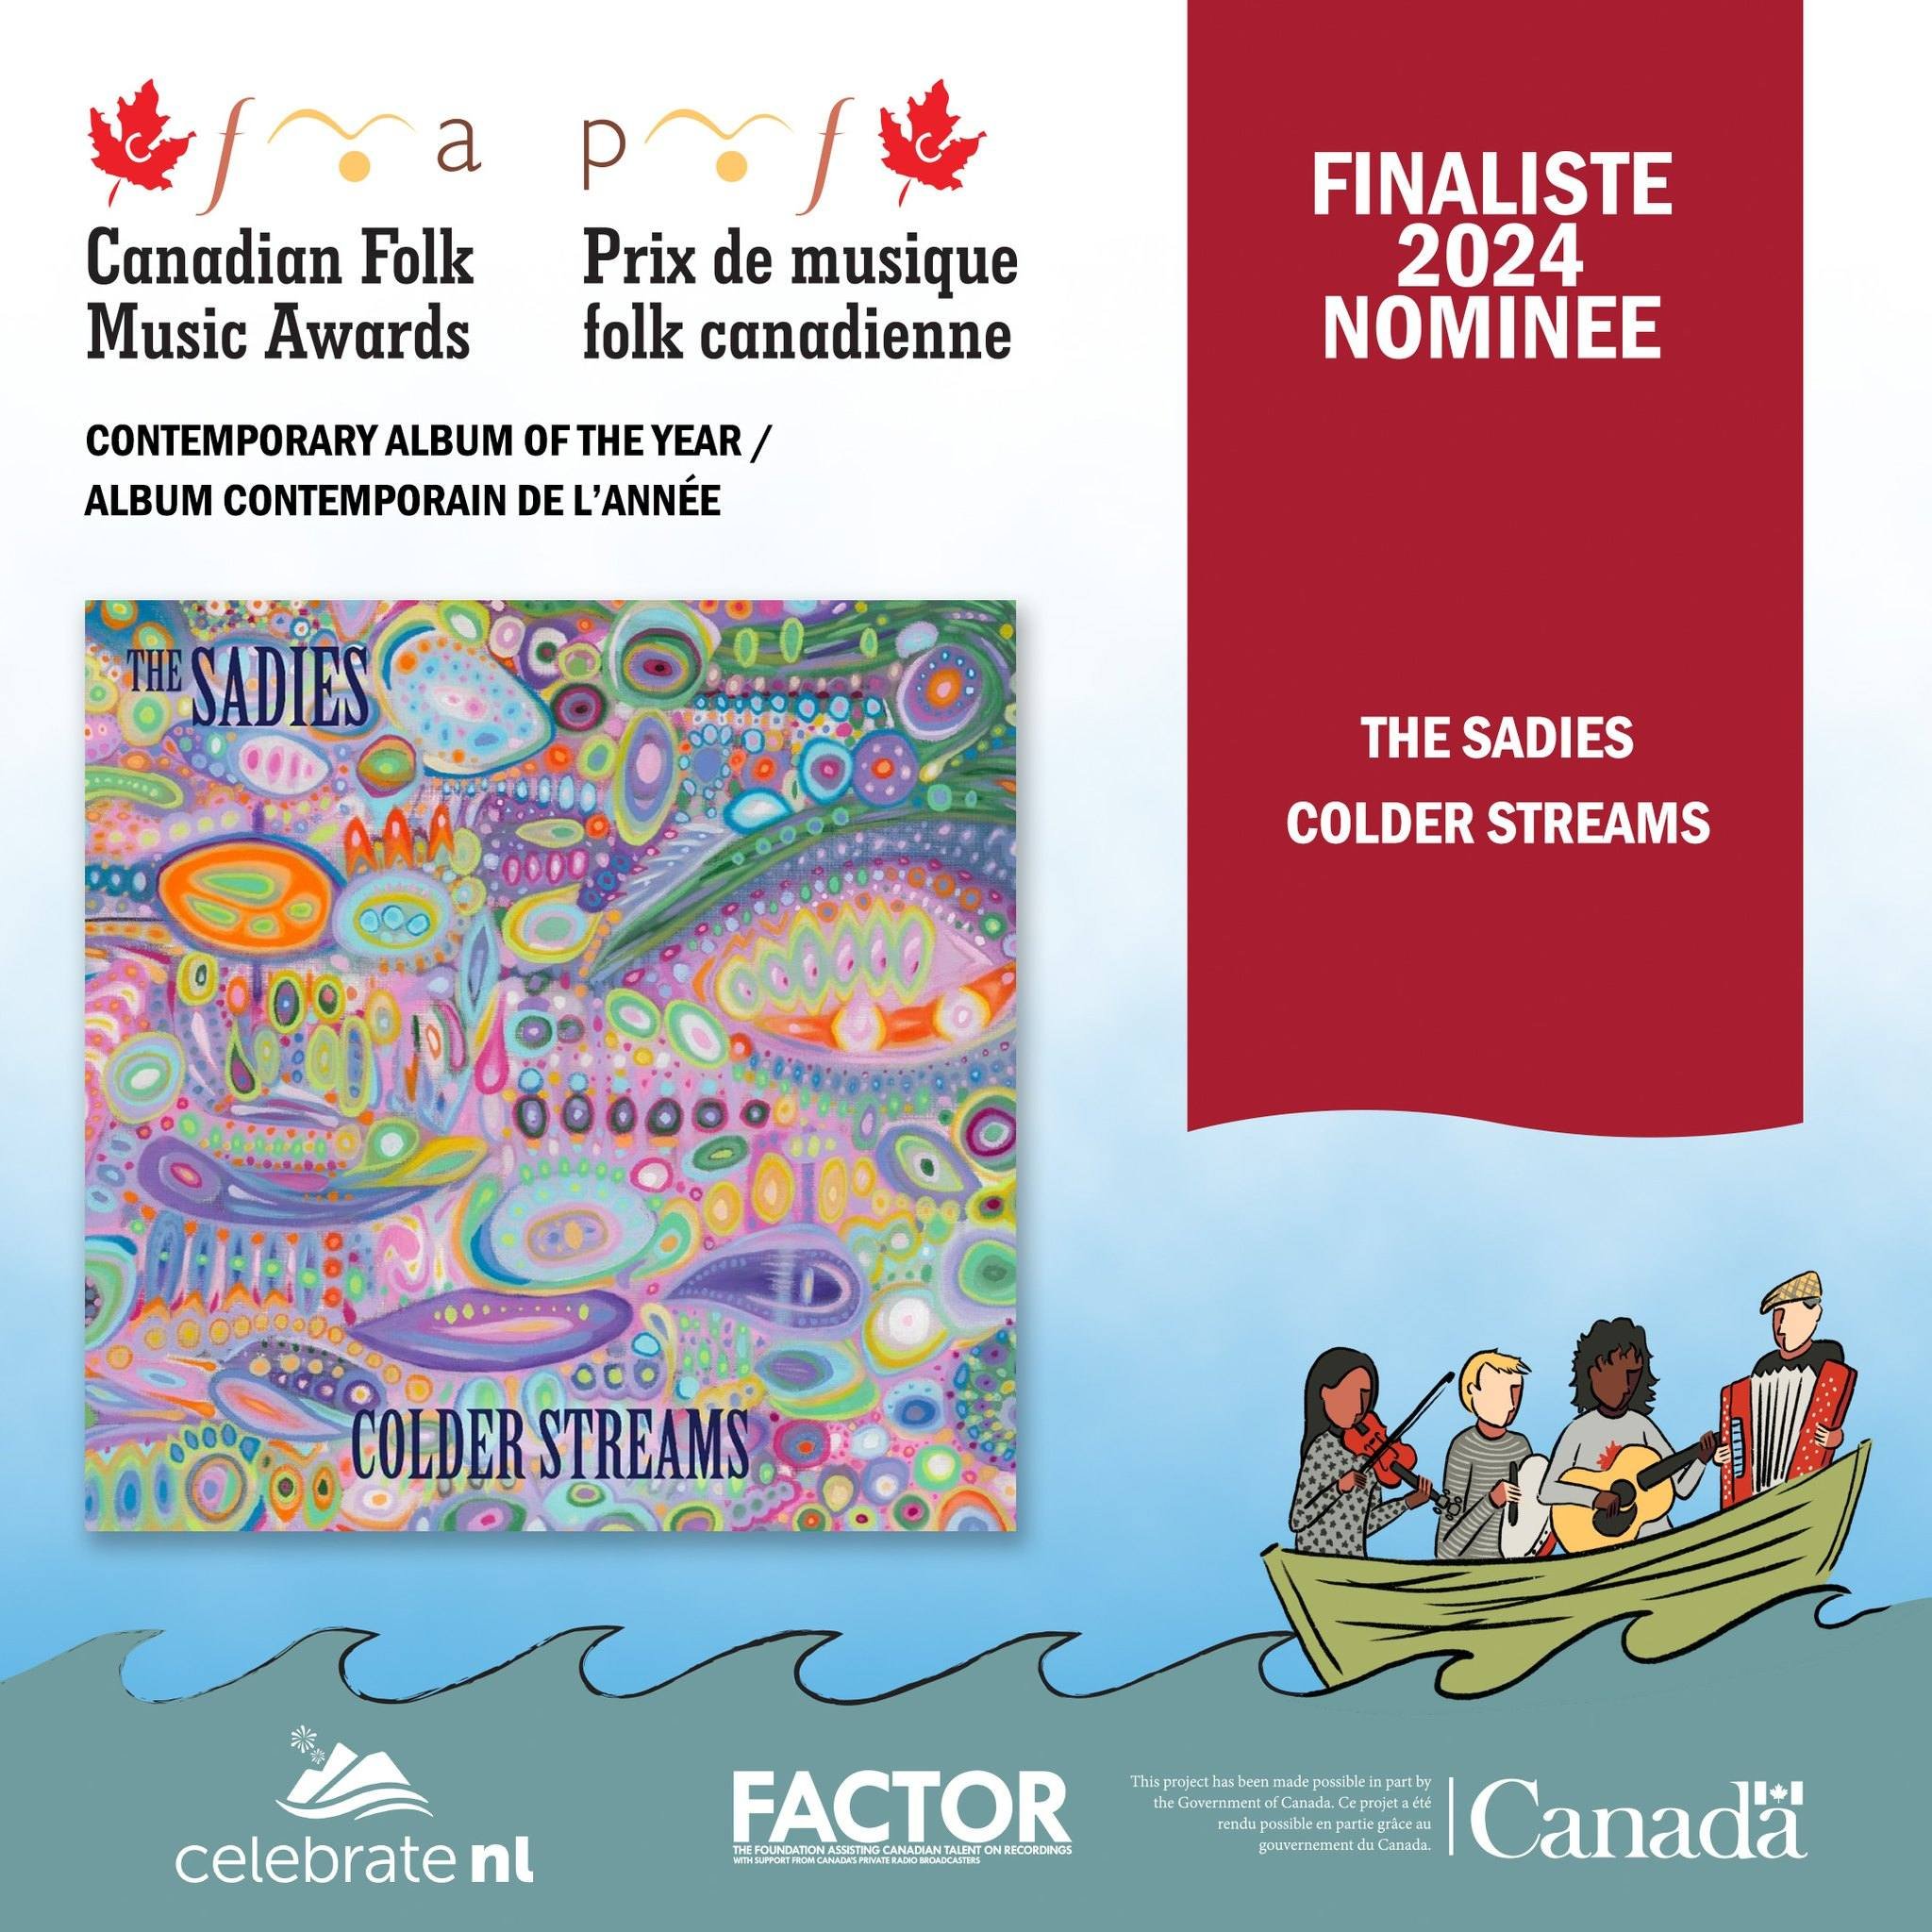 Thank you so much for the nomination @canadianfolkmusicawards. What an honour to have Colder Streams recognized alongside so many incredible albums. Congratulations to all the nominees.